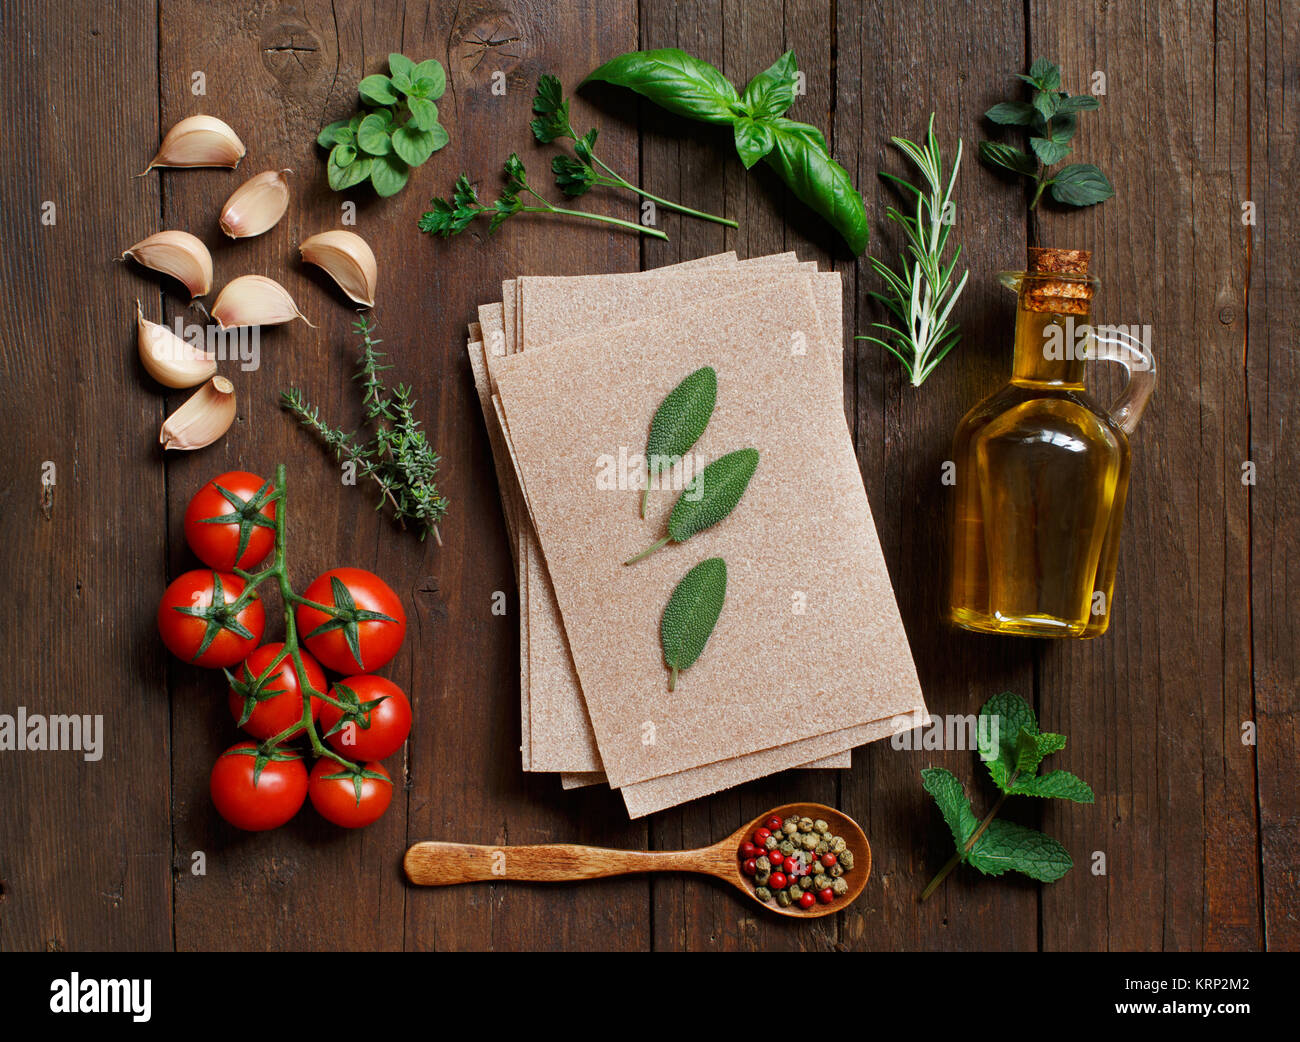 Whole wheat lasagna sheets, vegetables and herbs Stock Photo